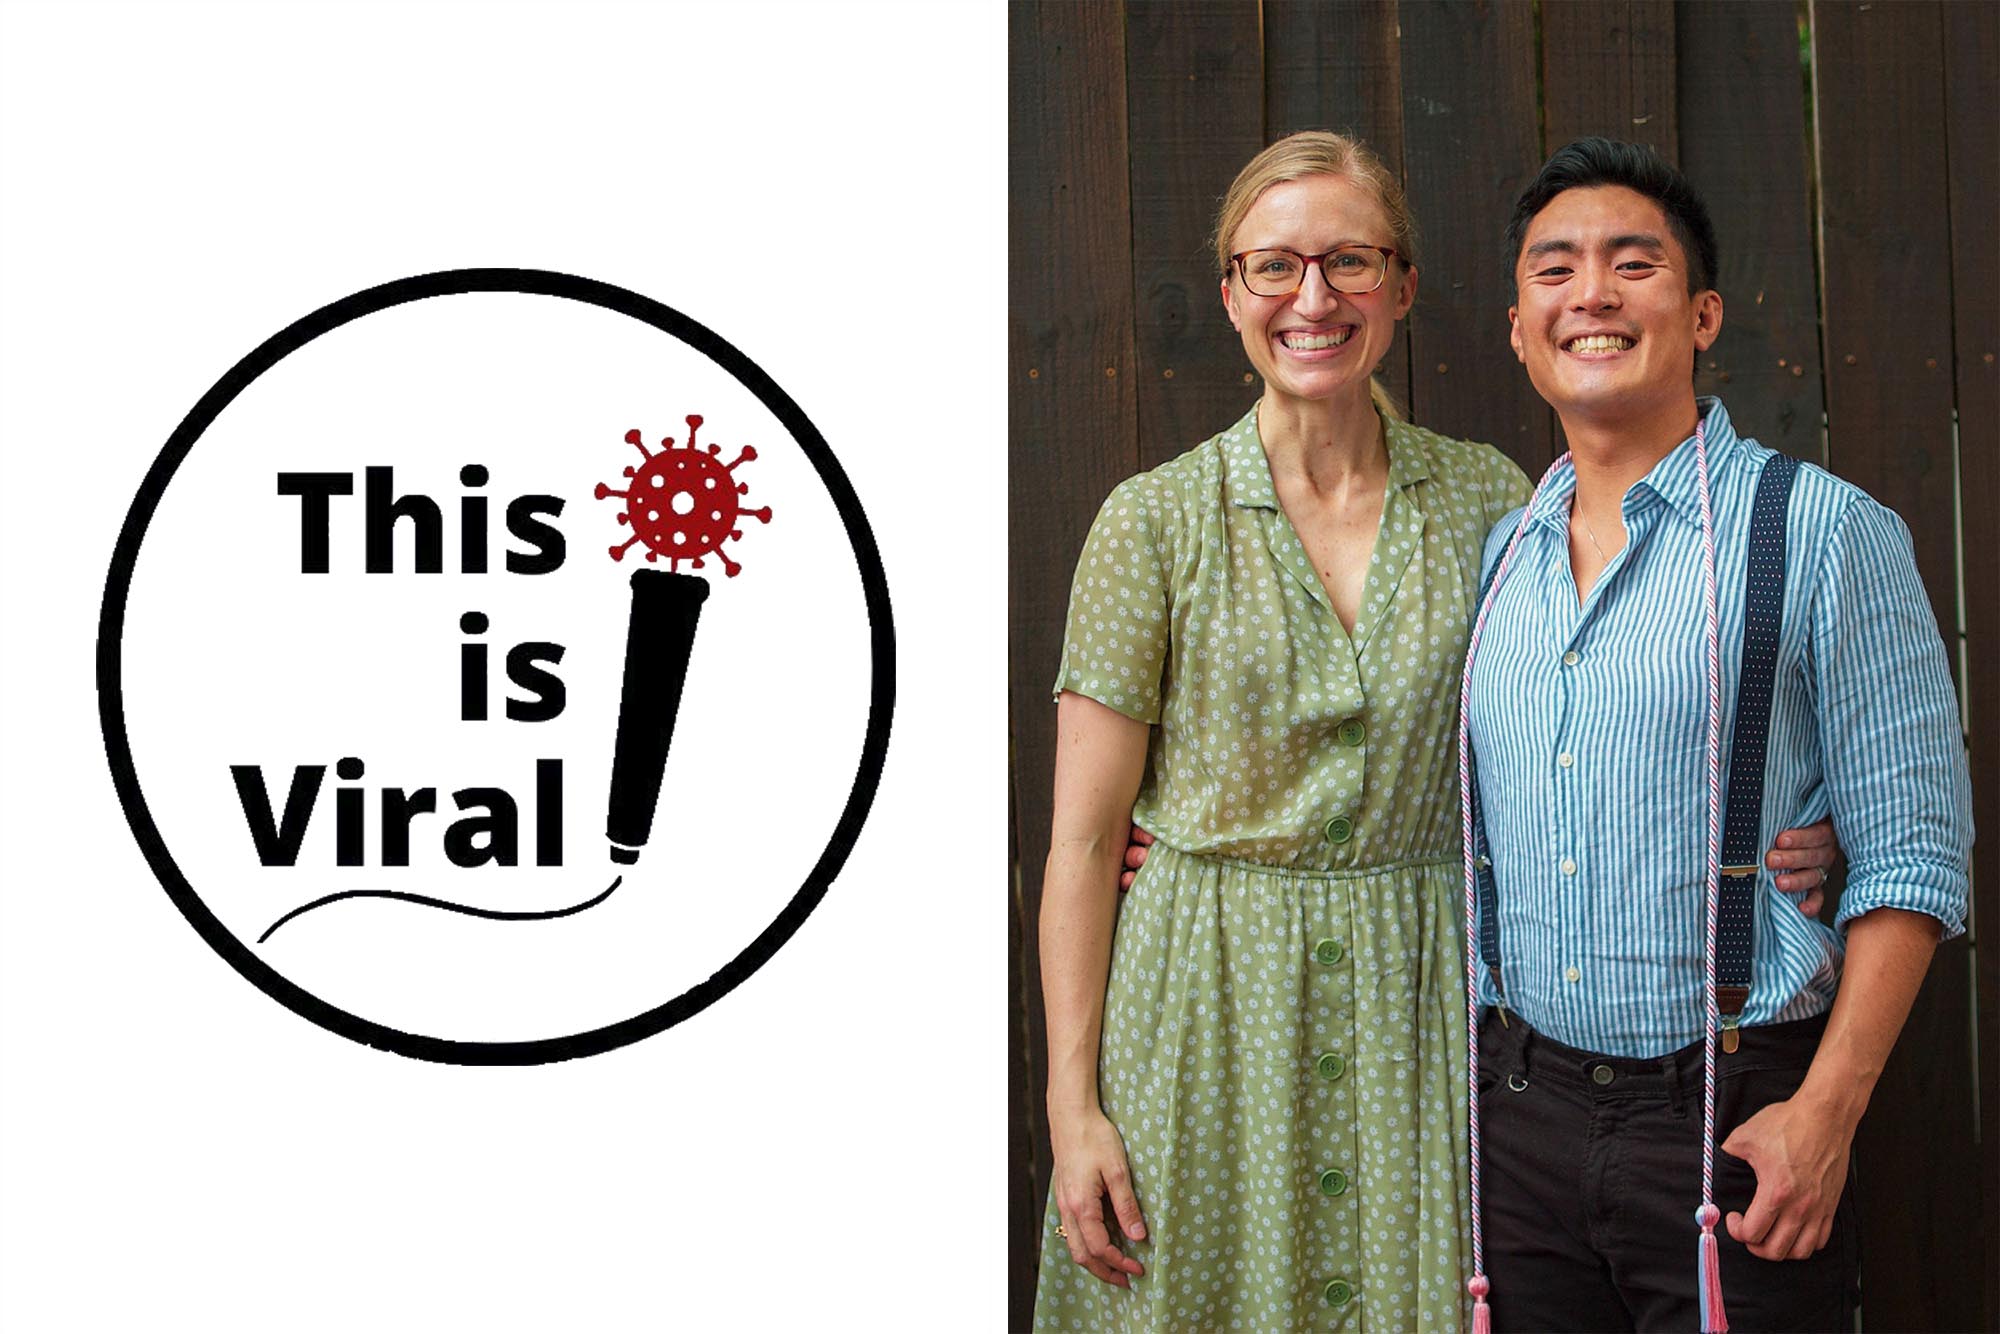 left: This is Viral, right: Dr. Kathryn Quissell, left, with Paco Abiad, right, pose for a picture together